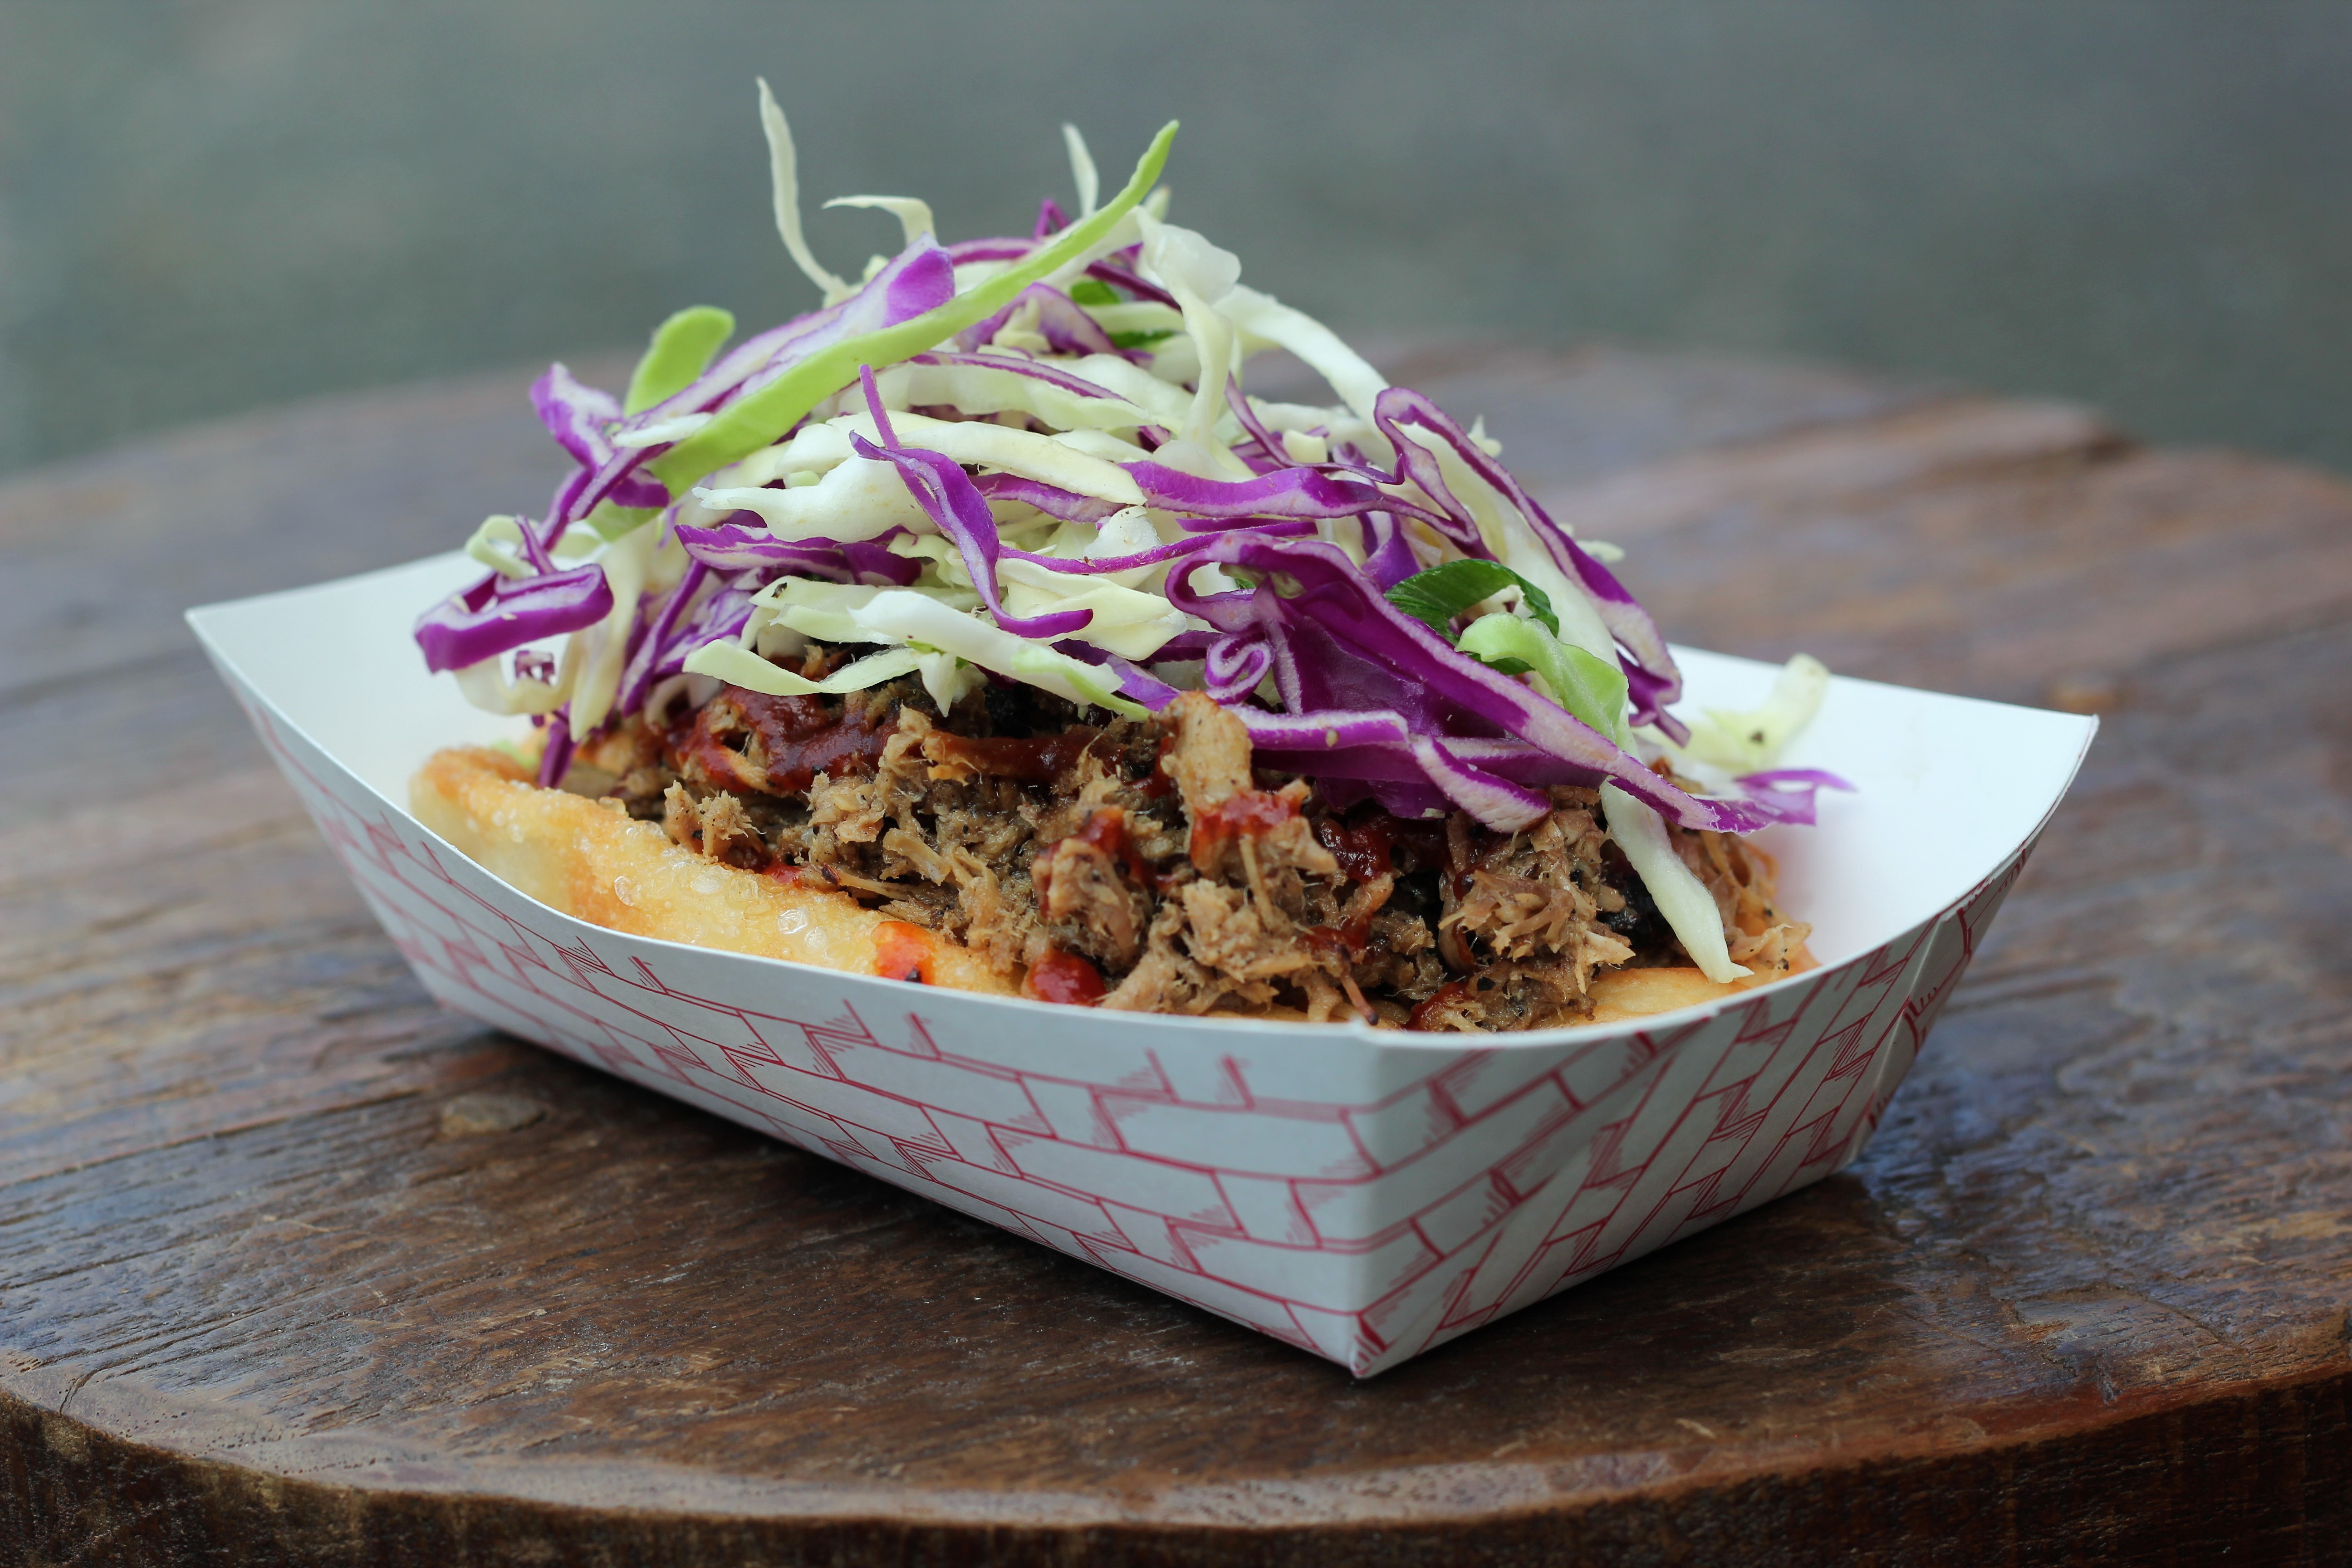 A closeup view of a pile of Off the Rez Cafe’s pulled pork fry bread taco inside a paper bowl, topped with coleslaw.